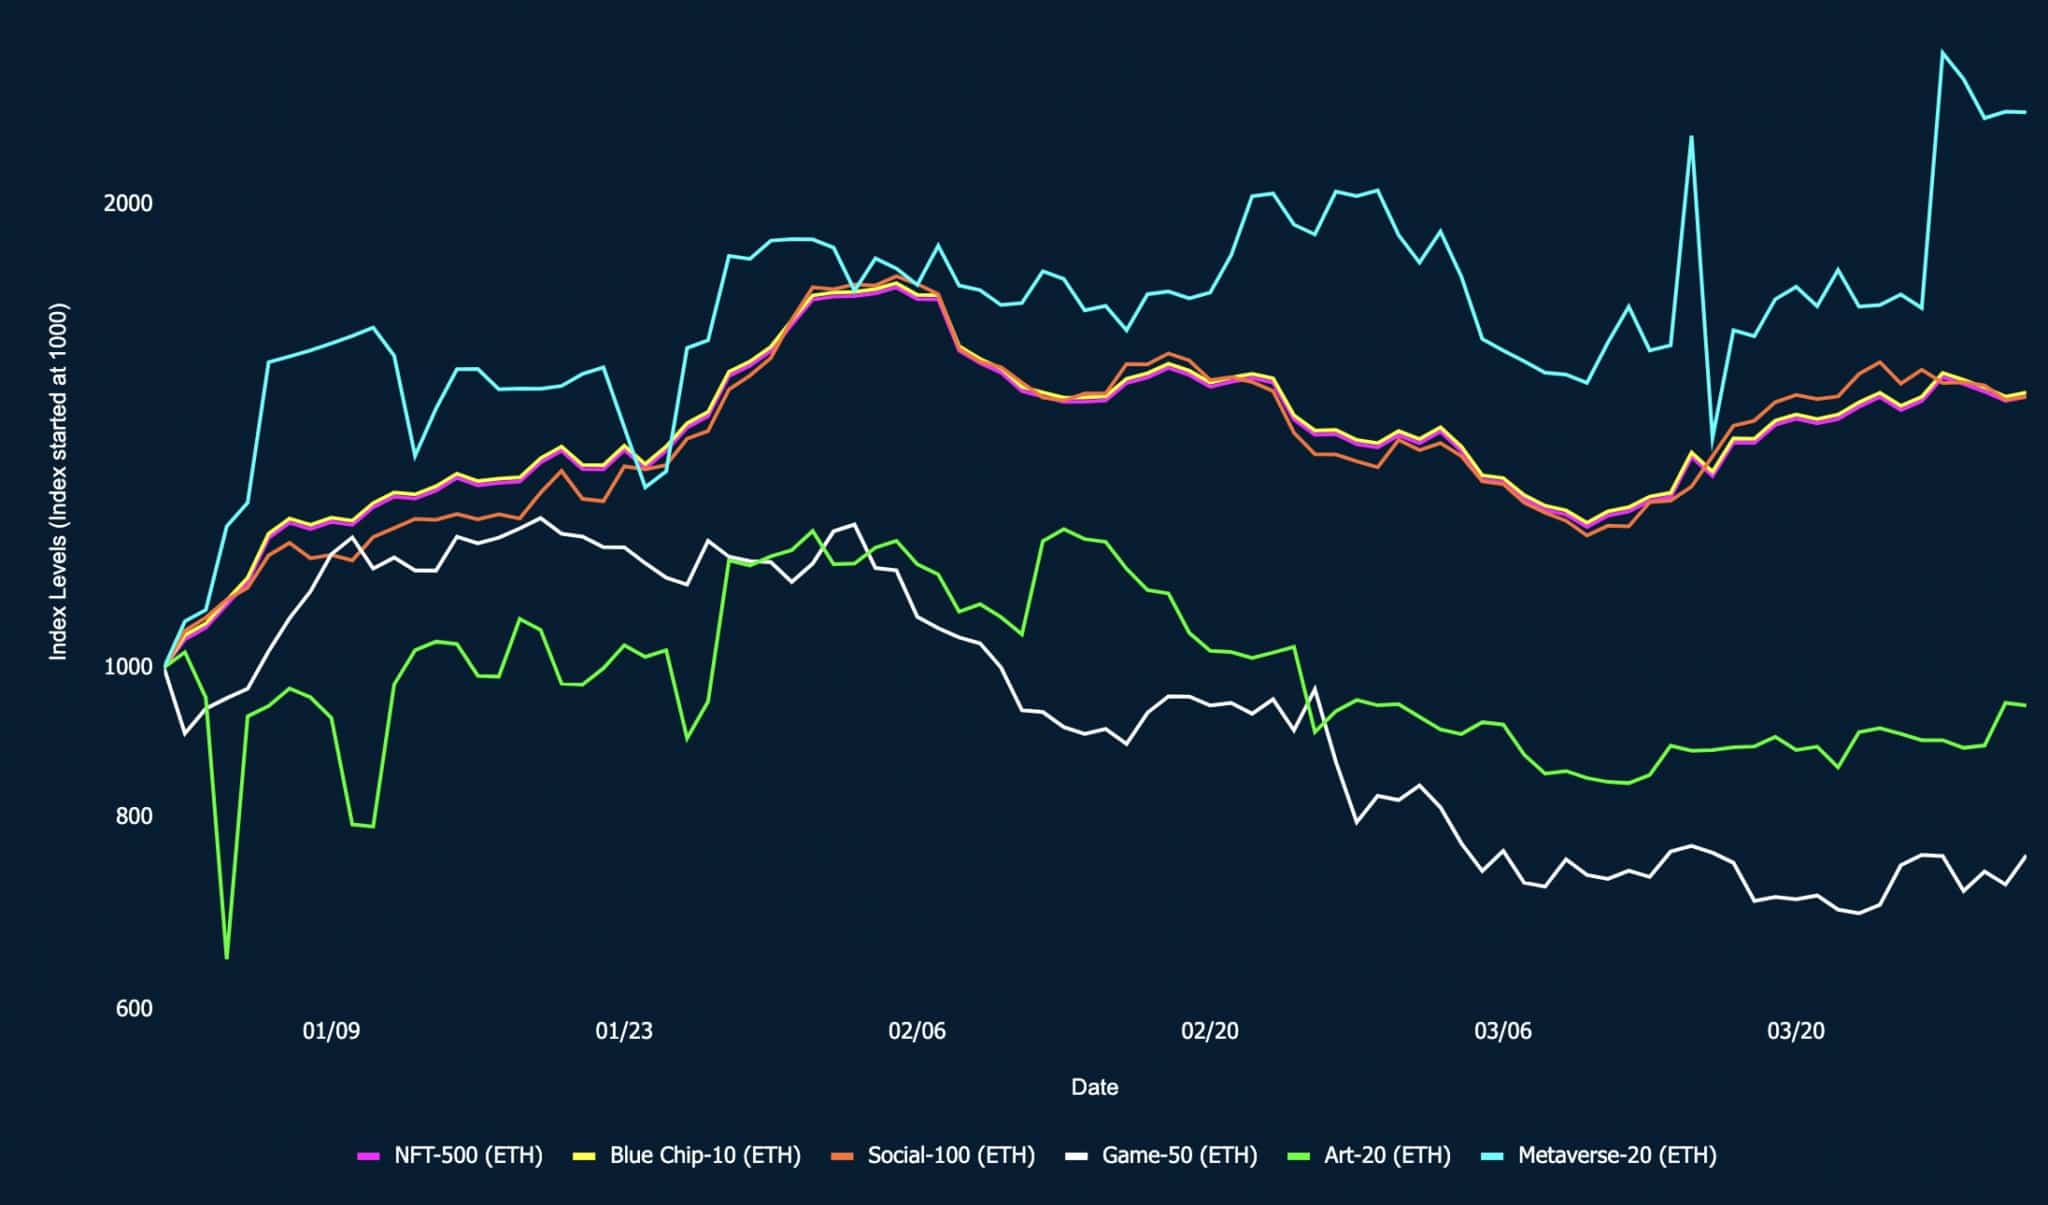 The Gaming-50 index has the biggest drop out of all the NFT indices - image from nansen.ai